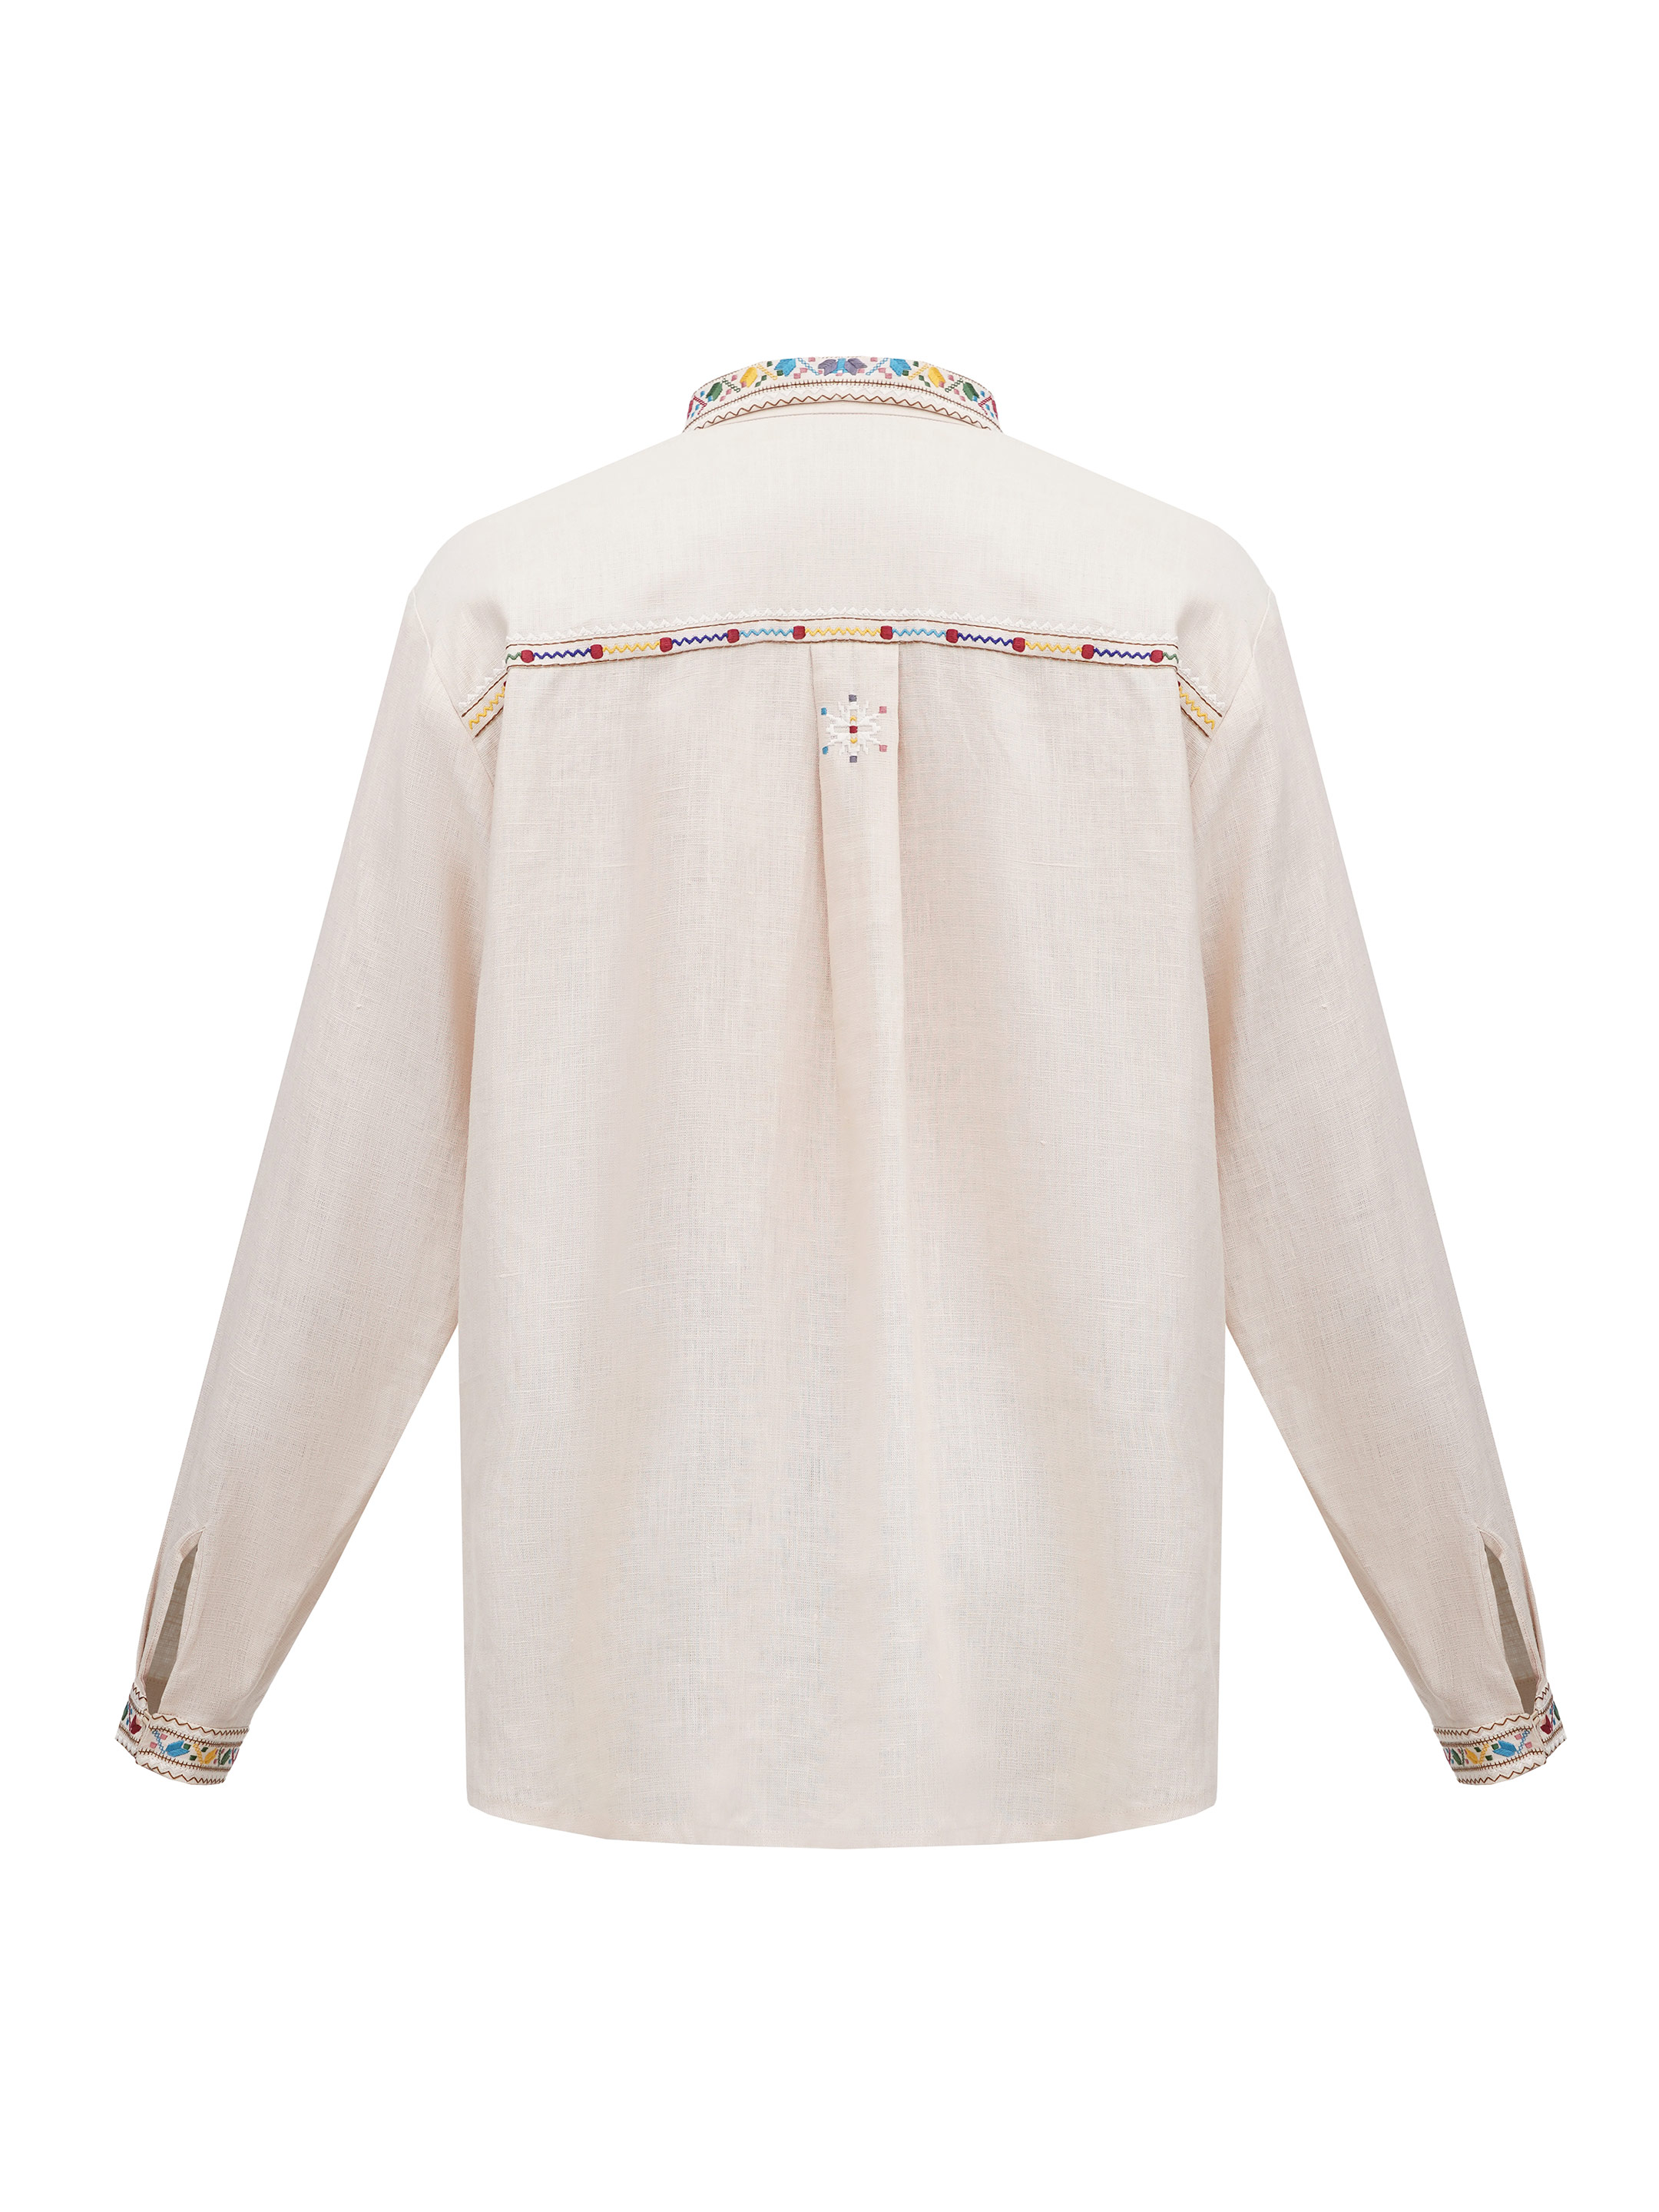 Men's embroidered shirt with collar Veremiy buy in Kyiv, price